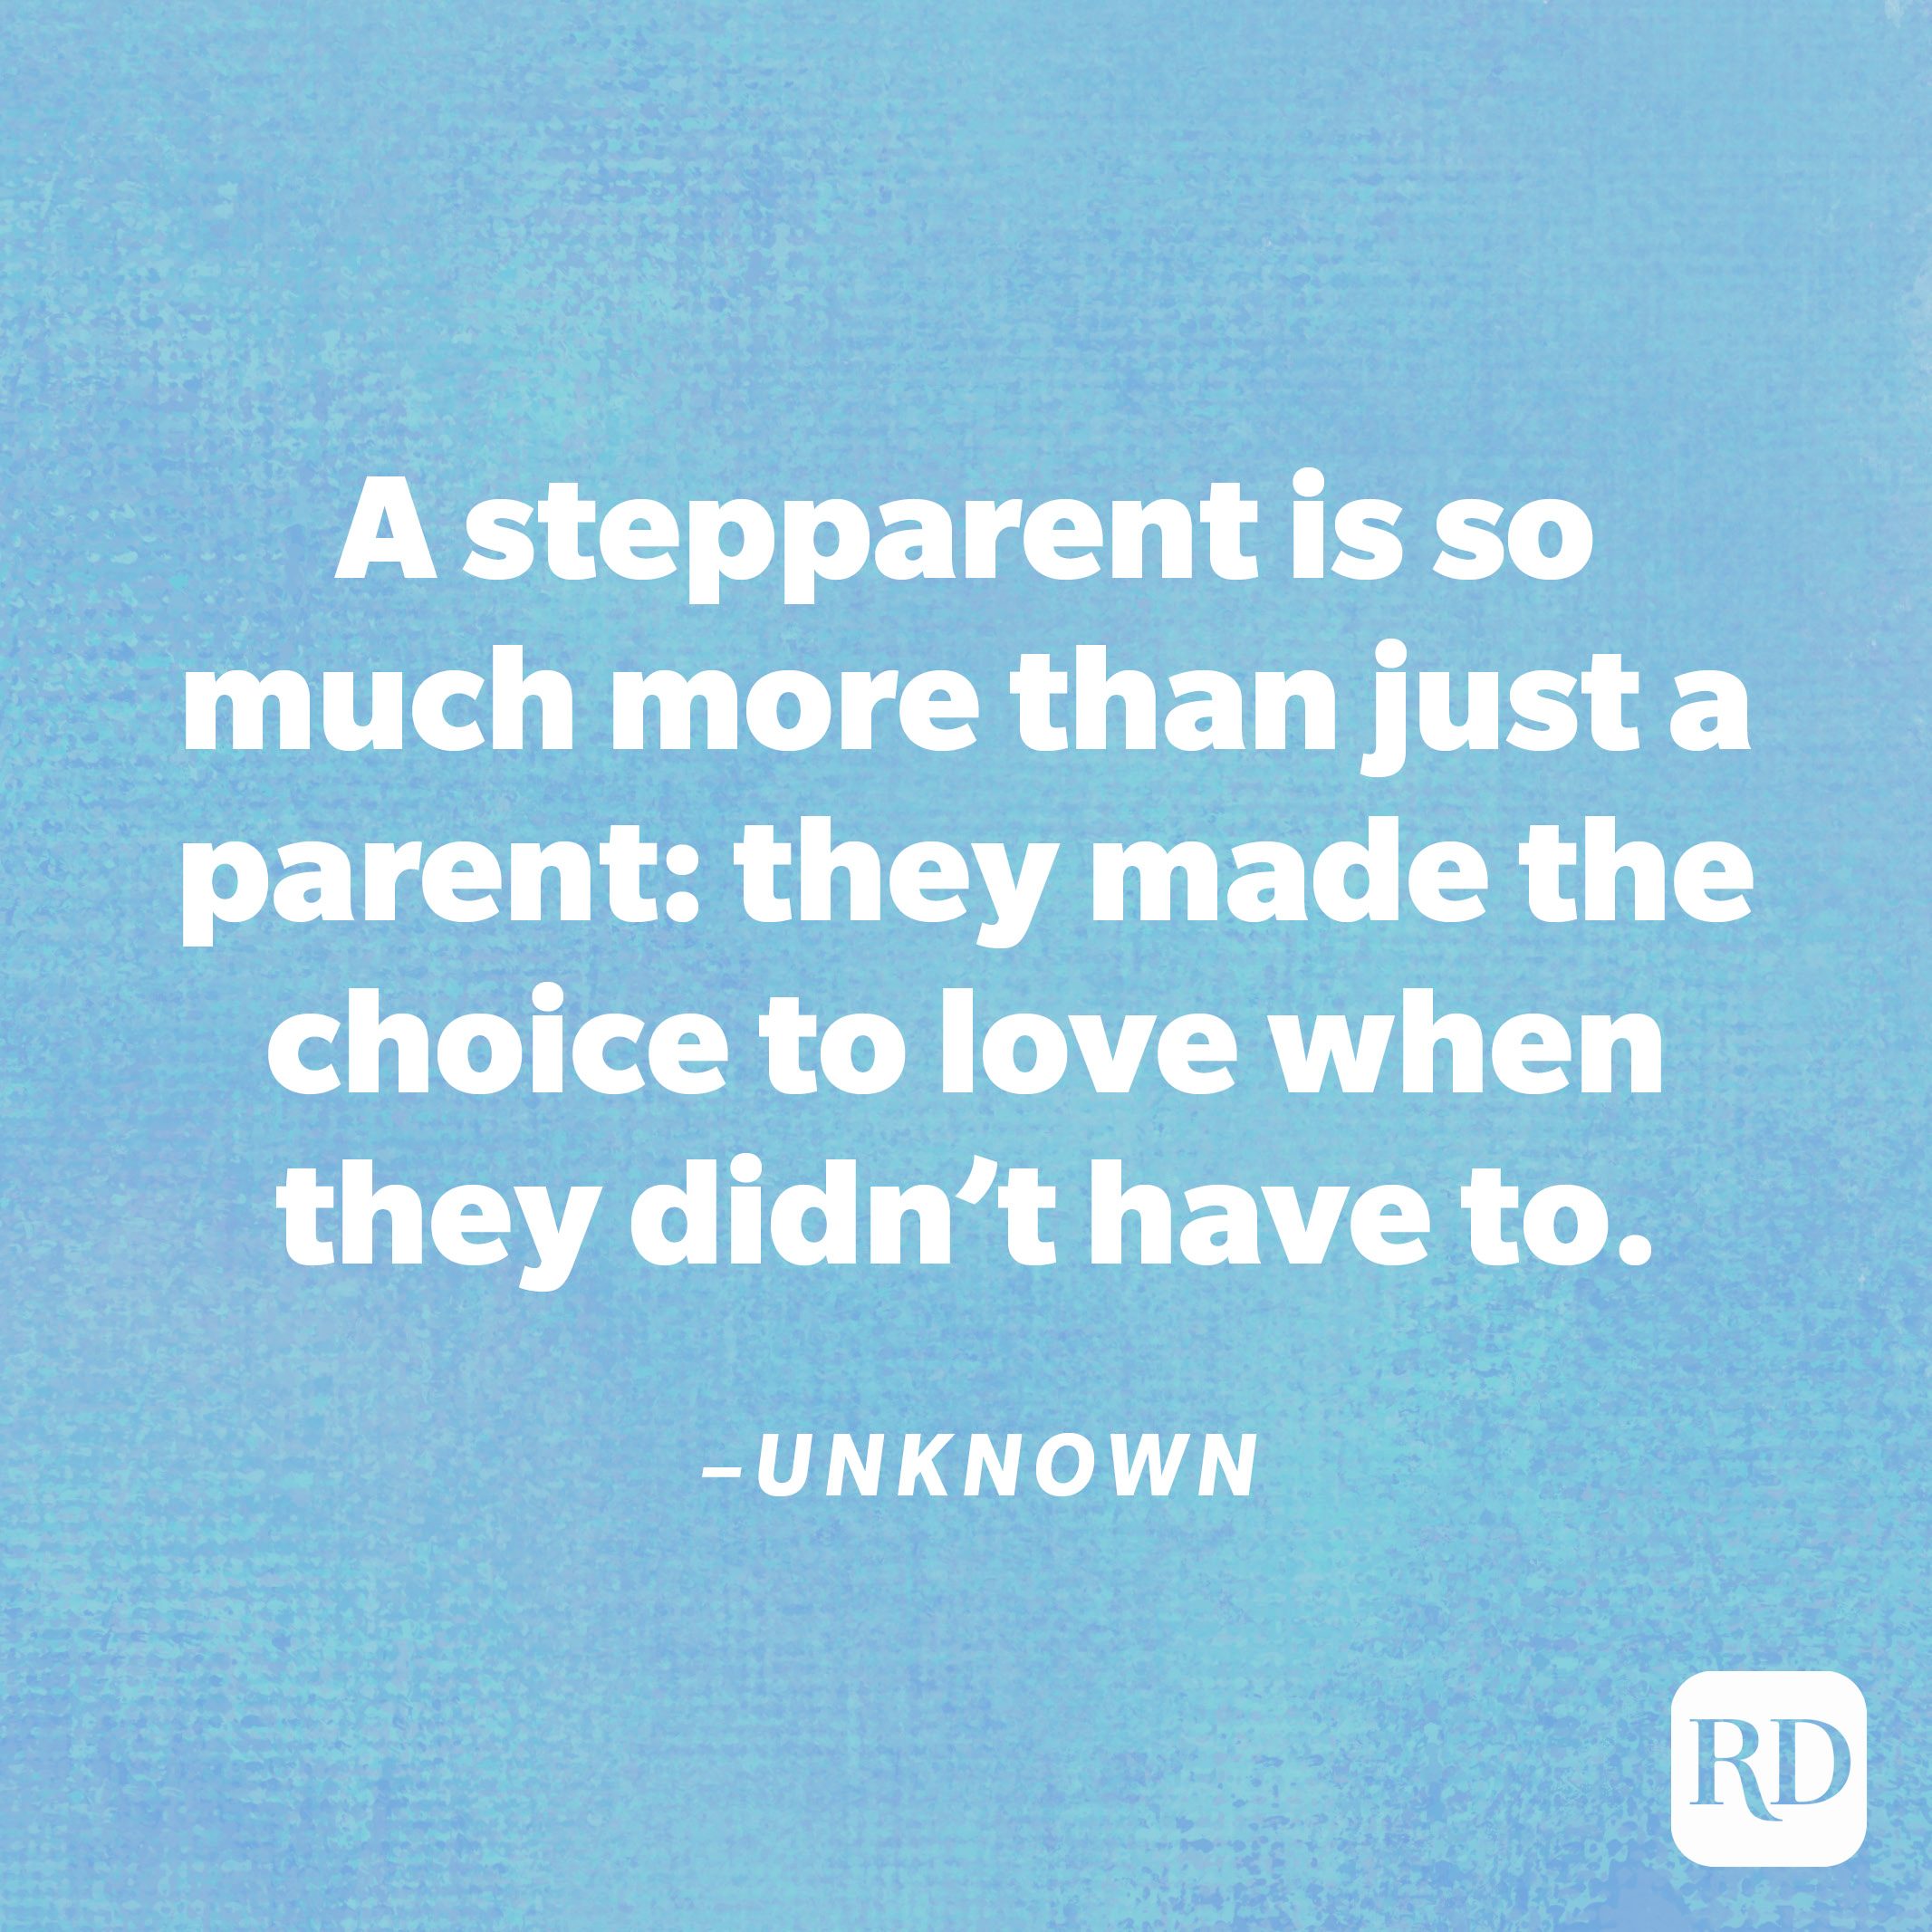 "A stepparent is so much more than just a parent: they made the choice to love when they didn’t have to."—Unknown